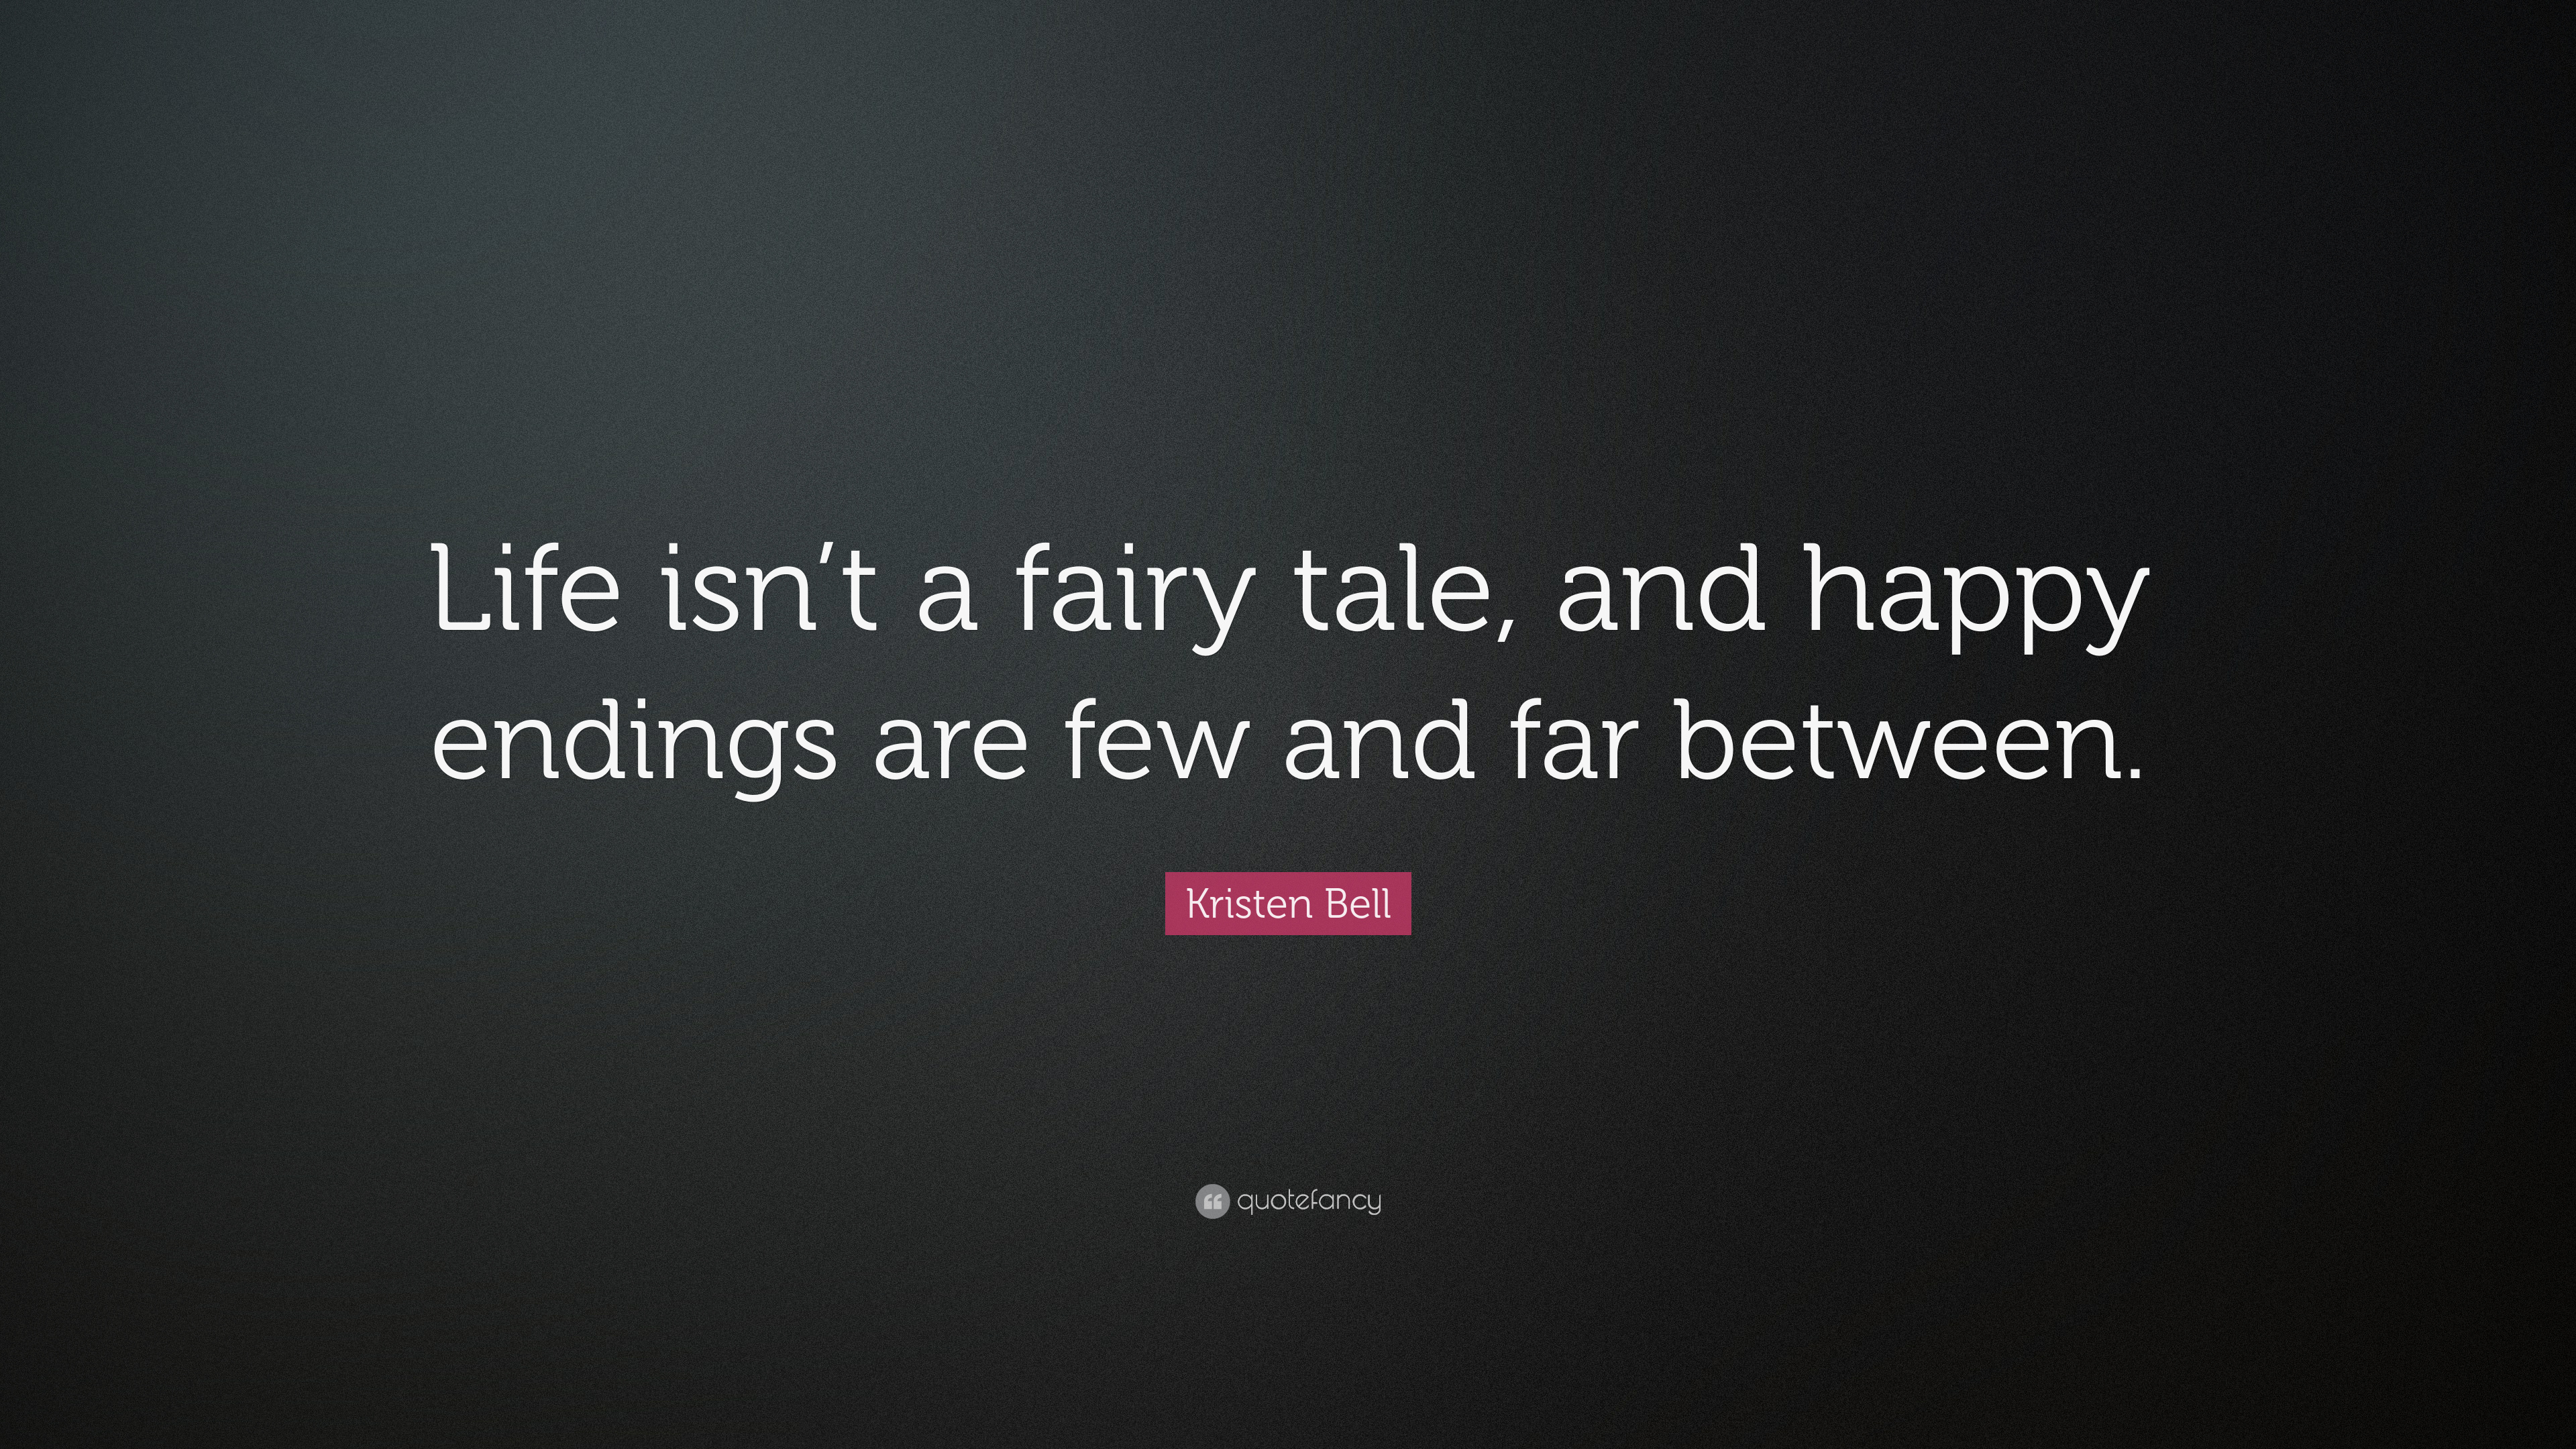 Life isn’t a fairy tale, and happy endings are few and far between.